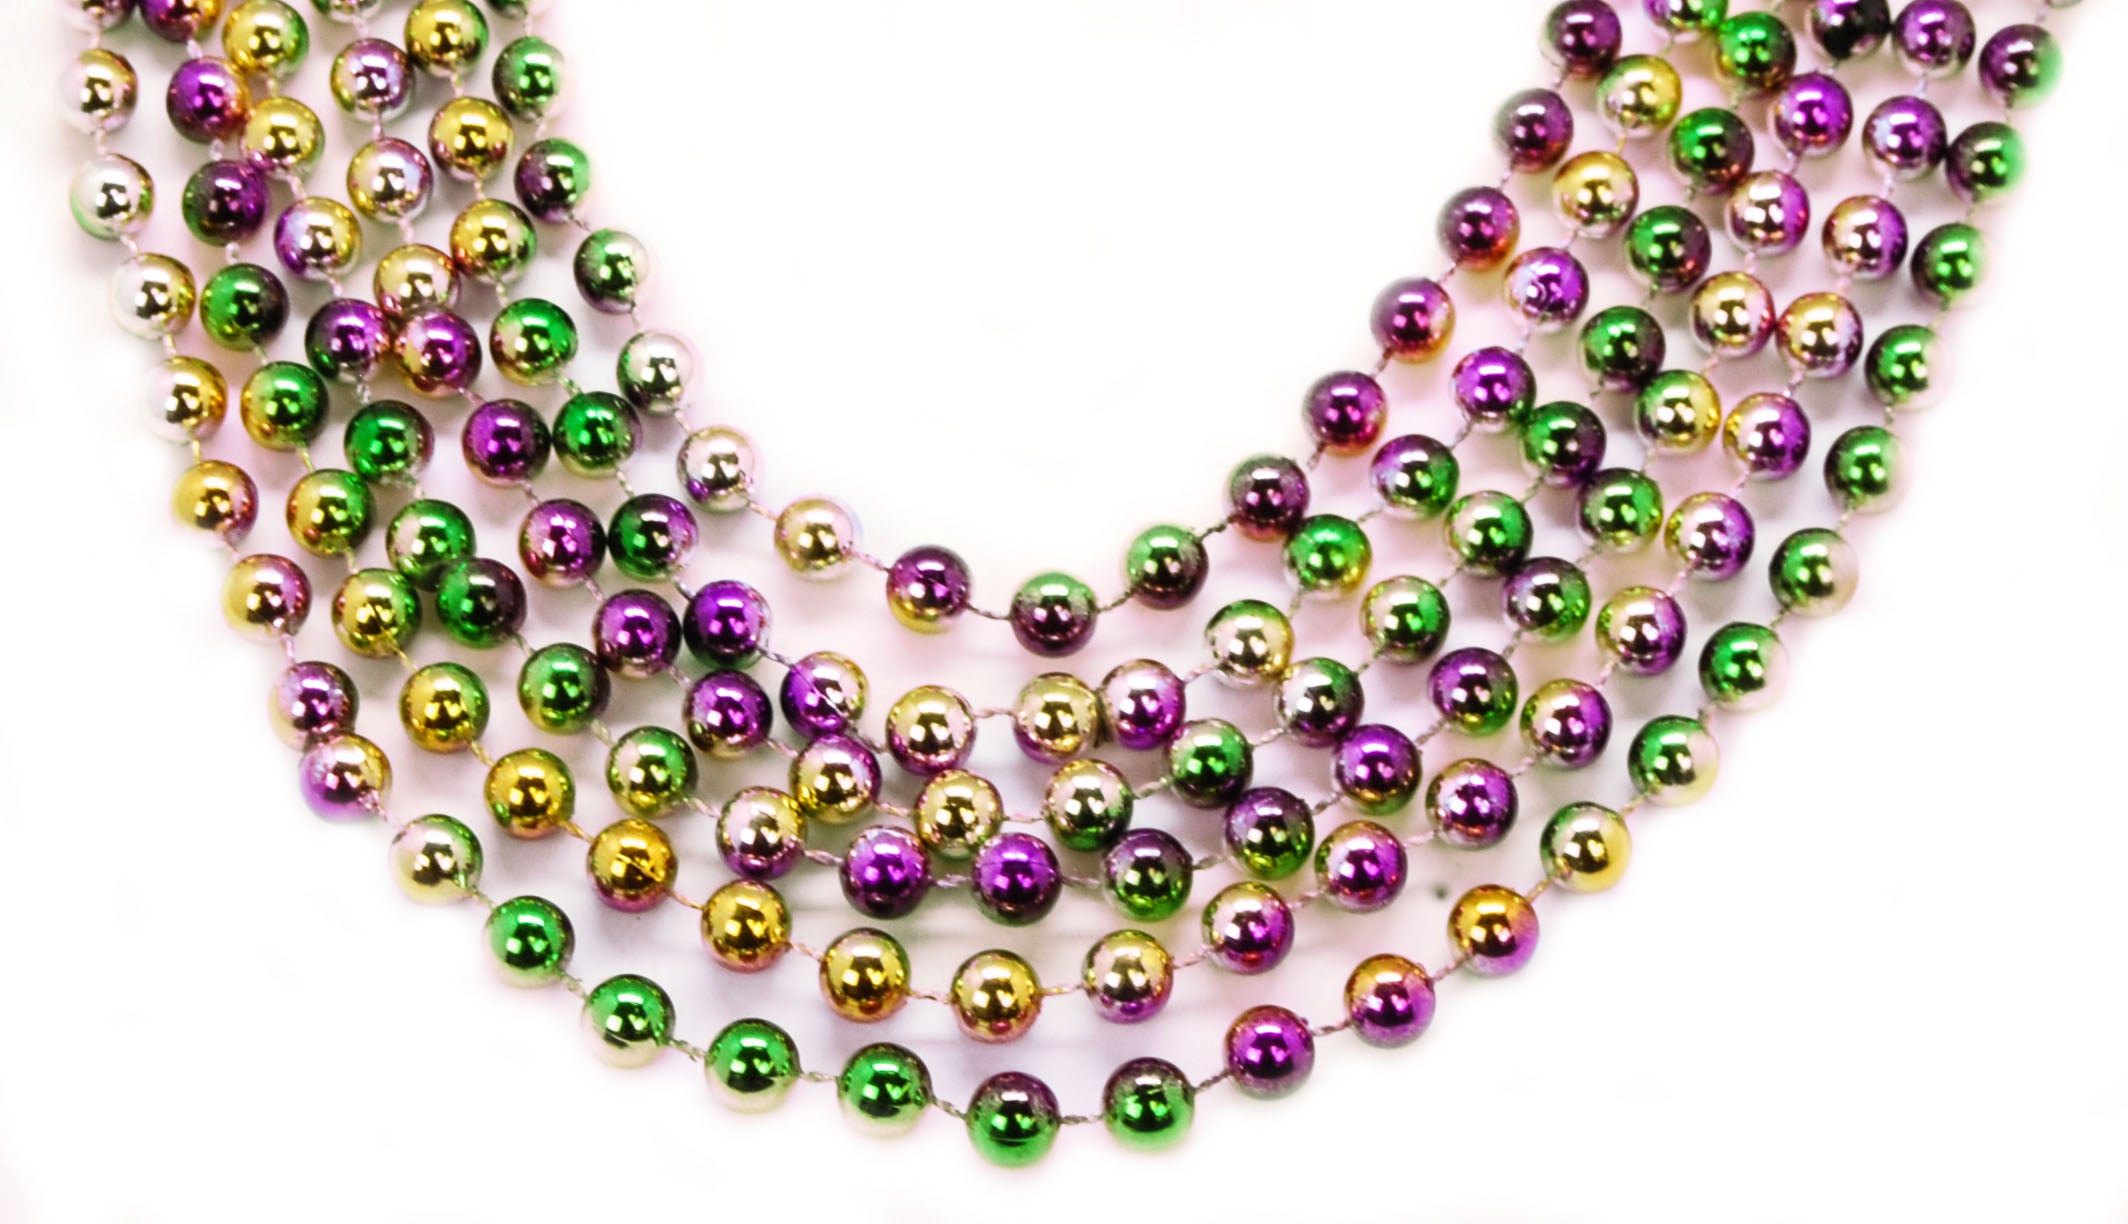 48" 10mm Round Beads Tri-Color Purple, Green, and Gold